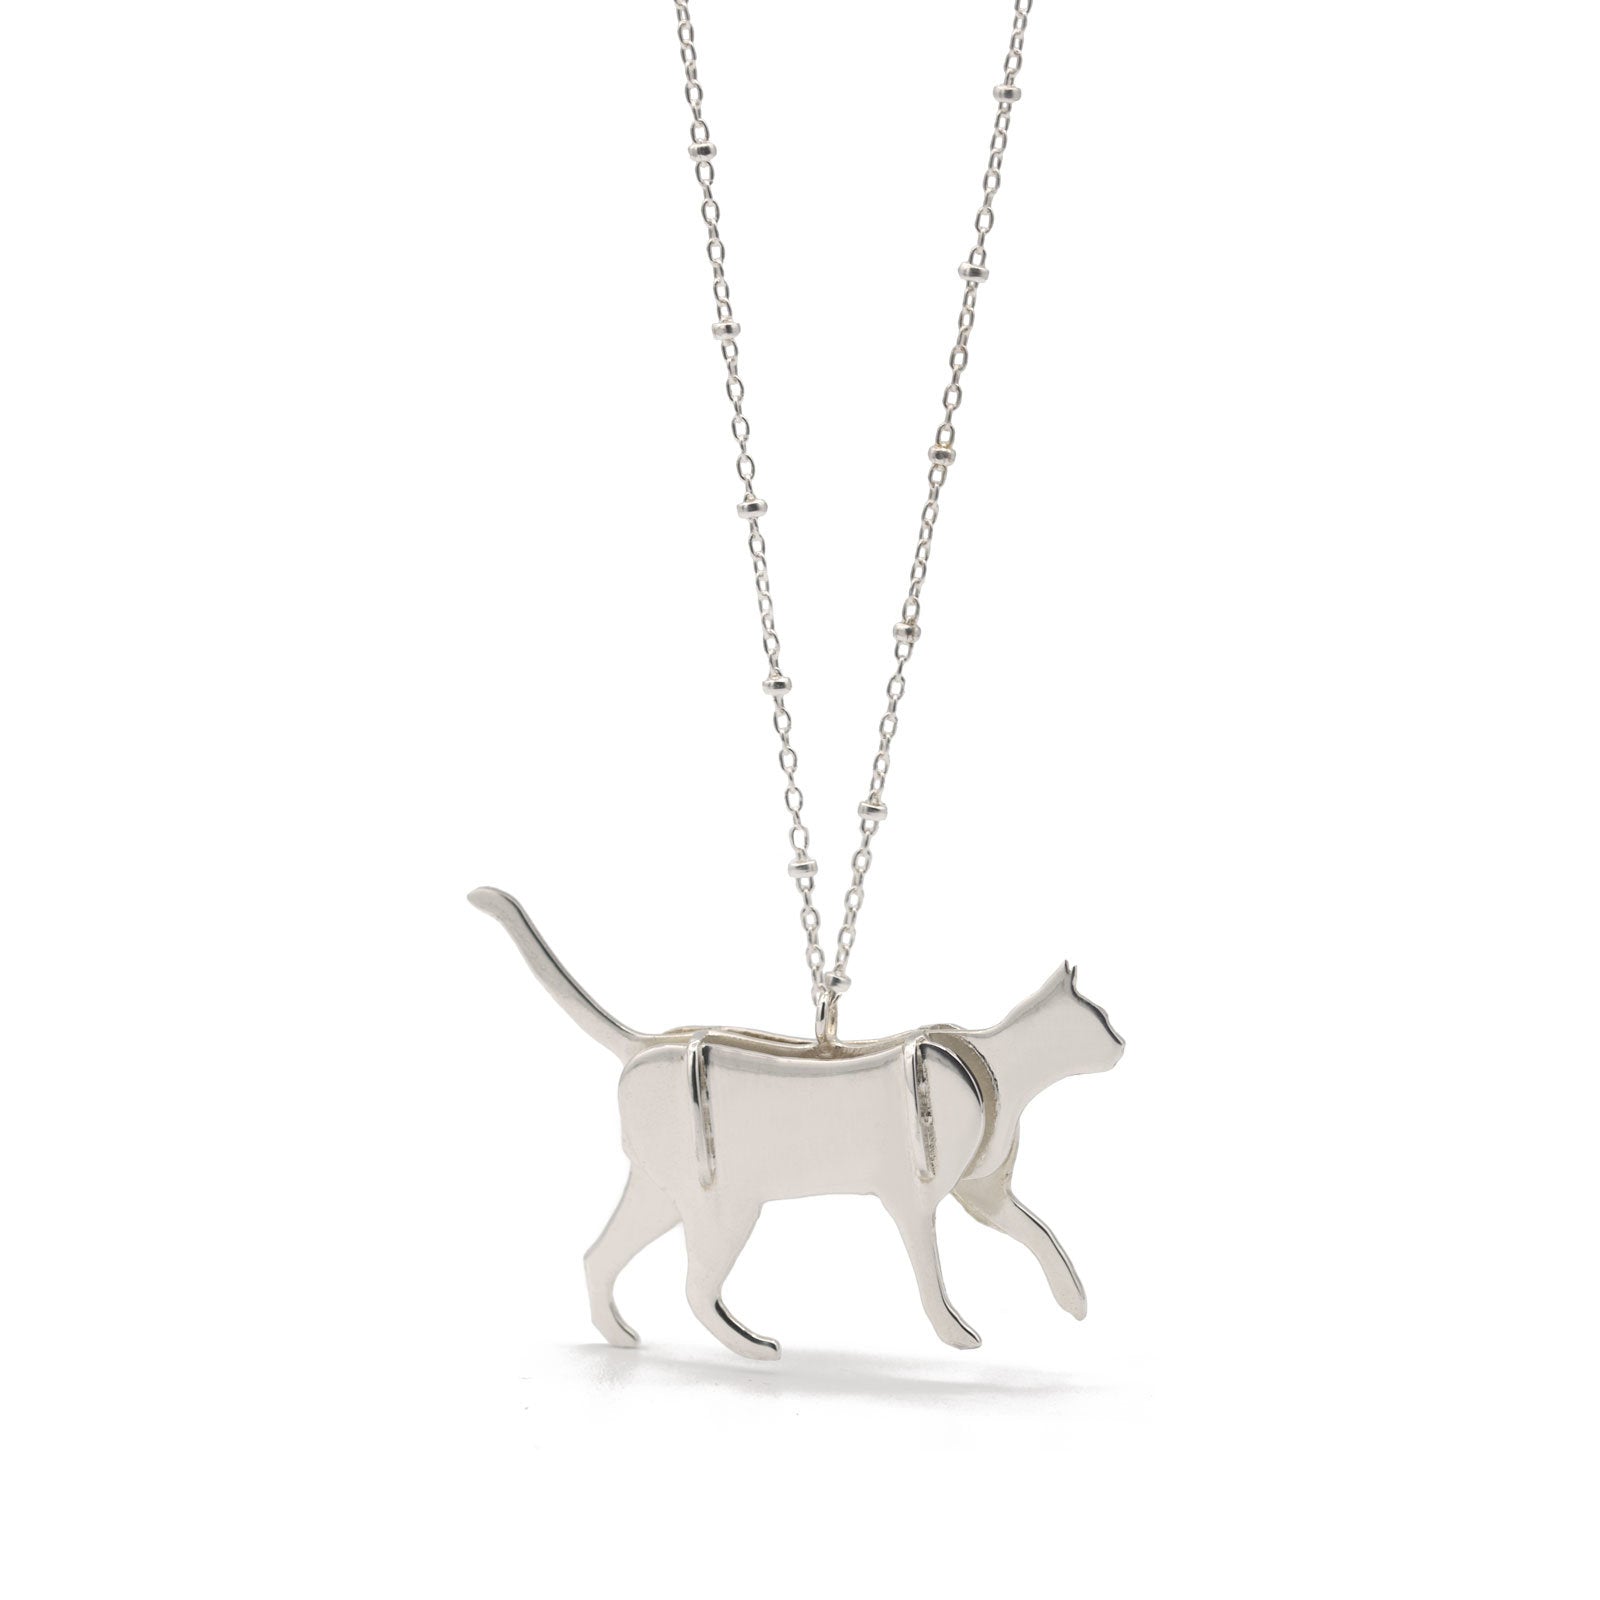 Silver cat necklace 3D puzzle with beaded chain